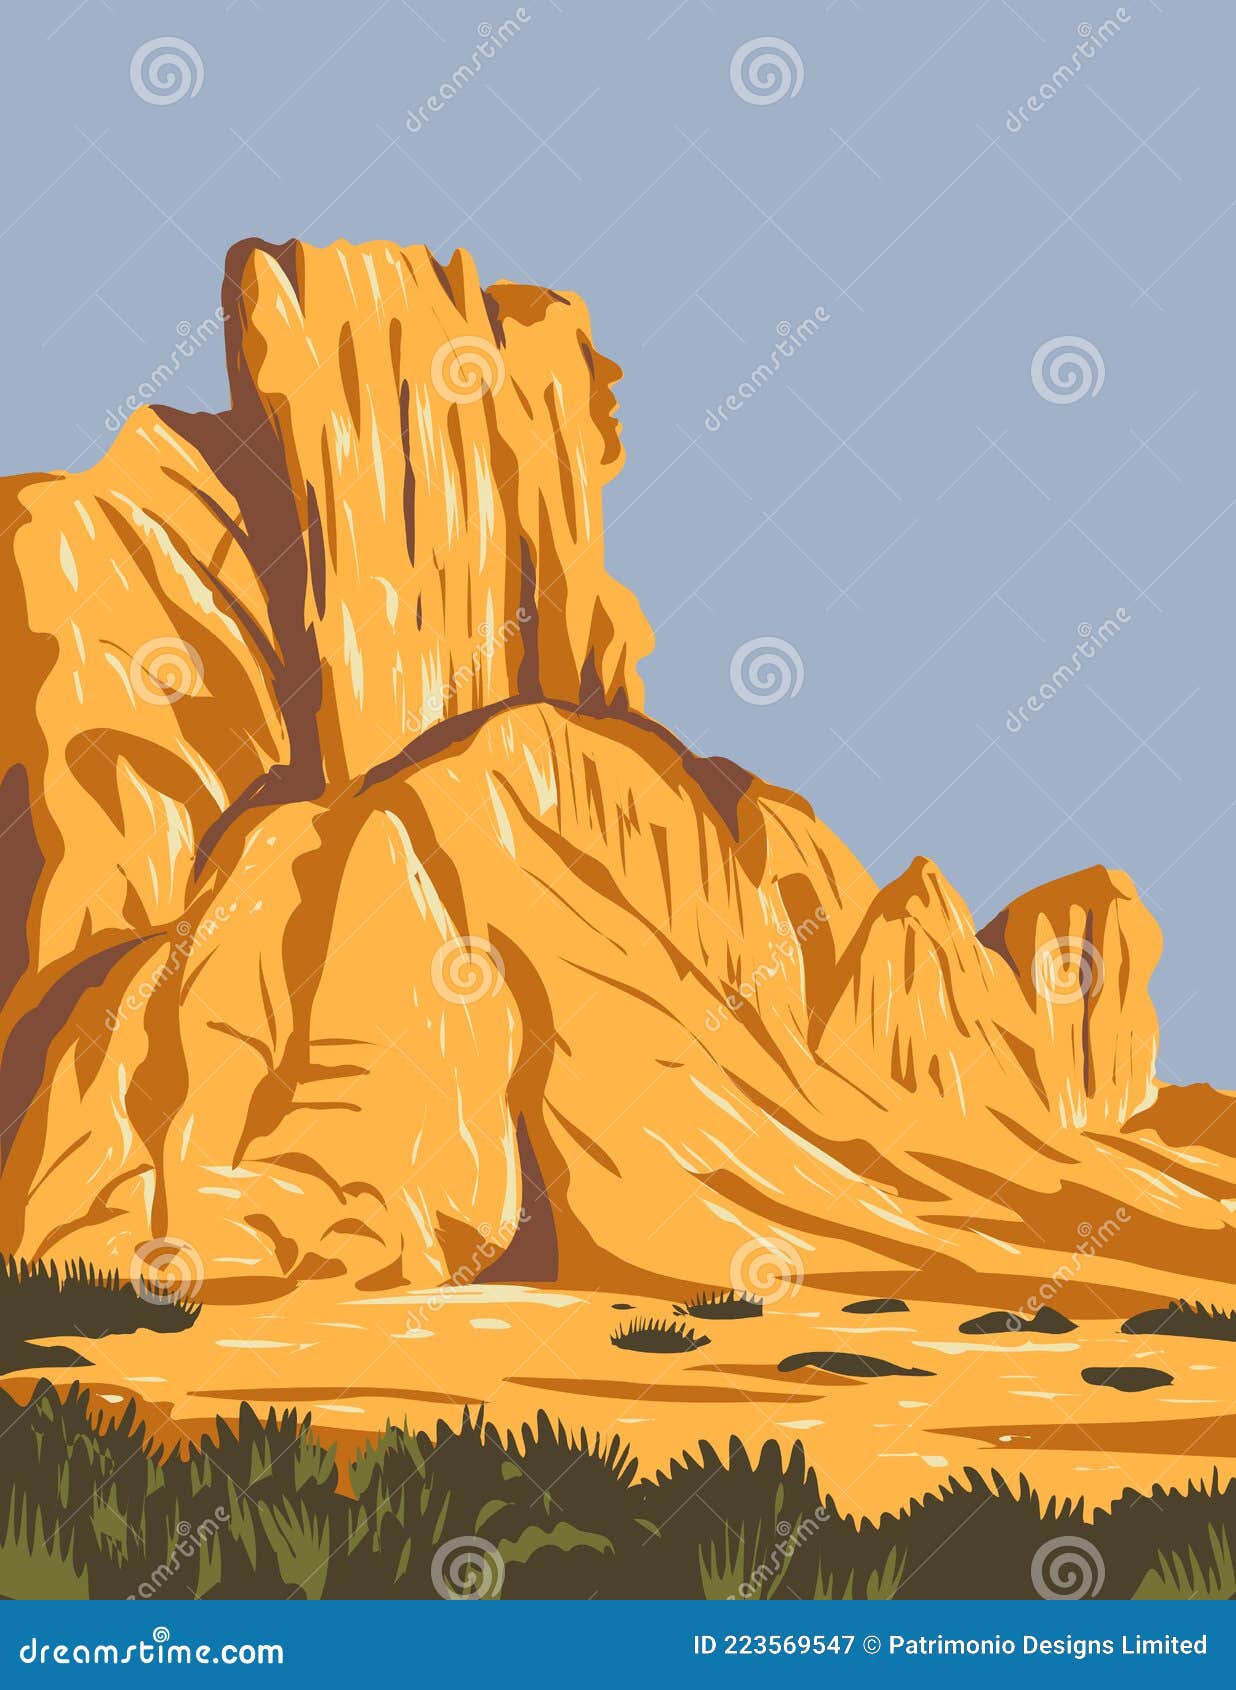 narrow faulted mountain chains and flat arid valleys or basins within basin and range national monument in lincoln and nye county